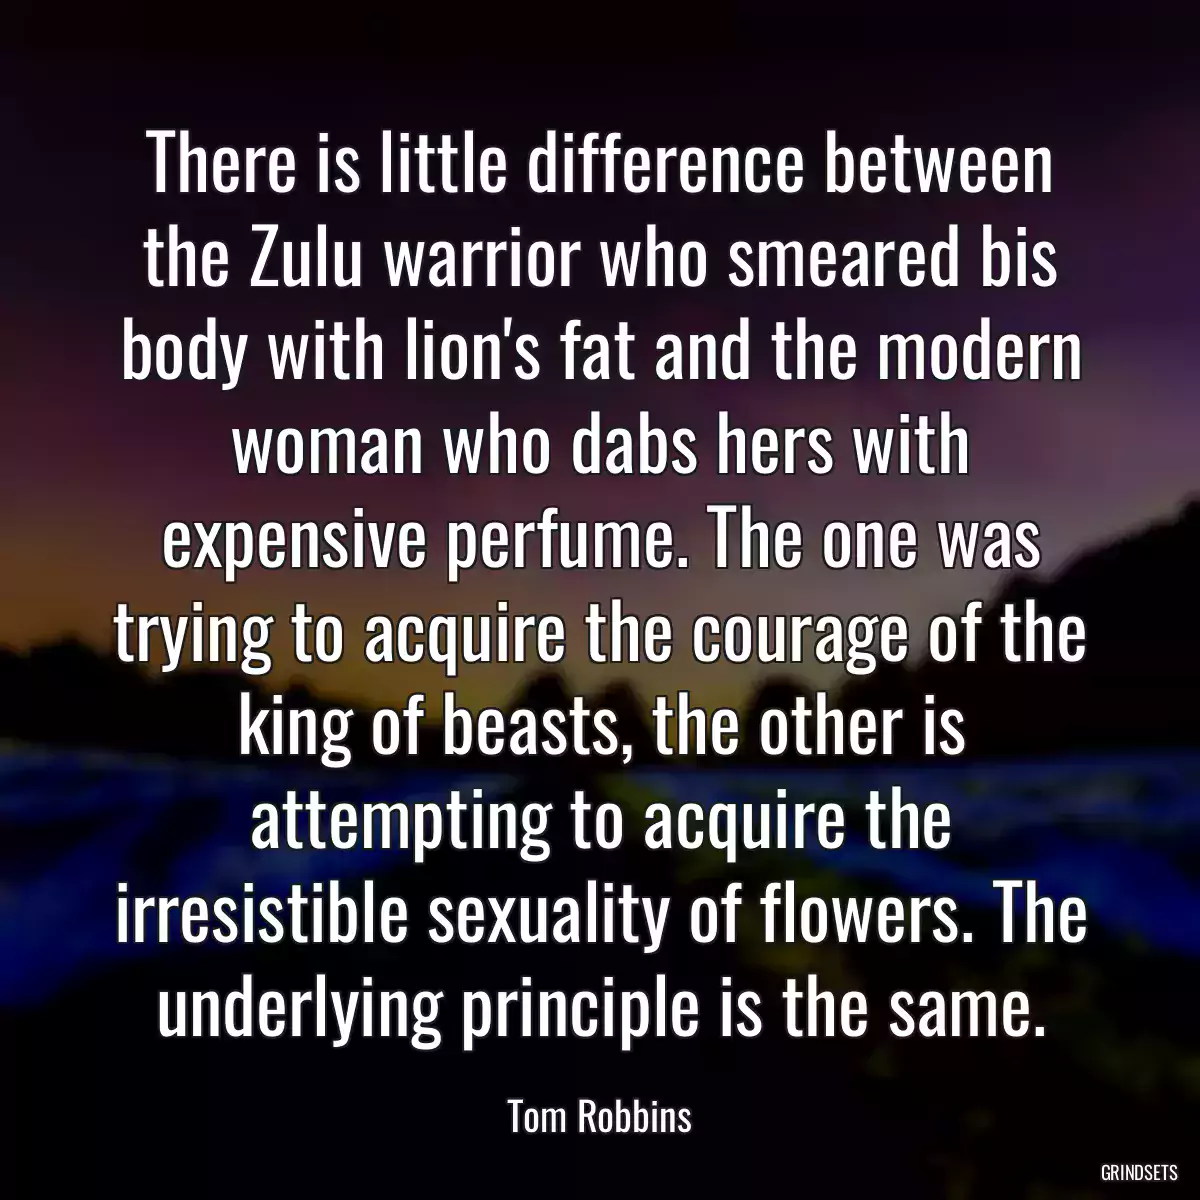 There is little difference between the Zulu warrior who smeared bis body with lion\'s fat and the modern woman who dabs hers with expensive perfume. The one was trying to acquire the courage of the king of beasts, the other is attempting to acquire the irresistible sexuality of flowers. The underlying principle is the same.